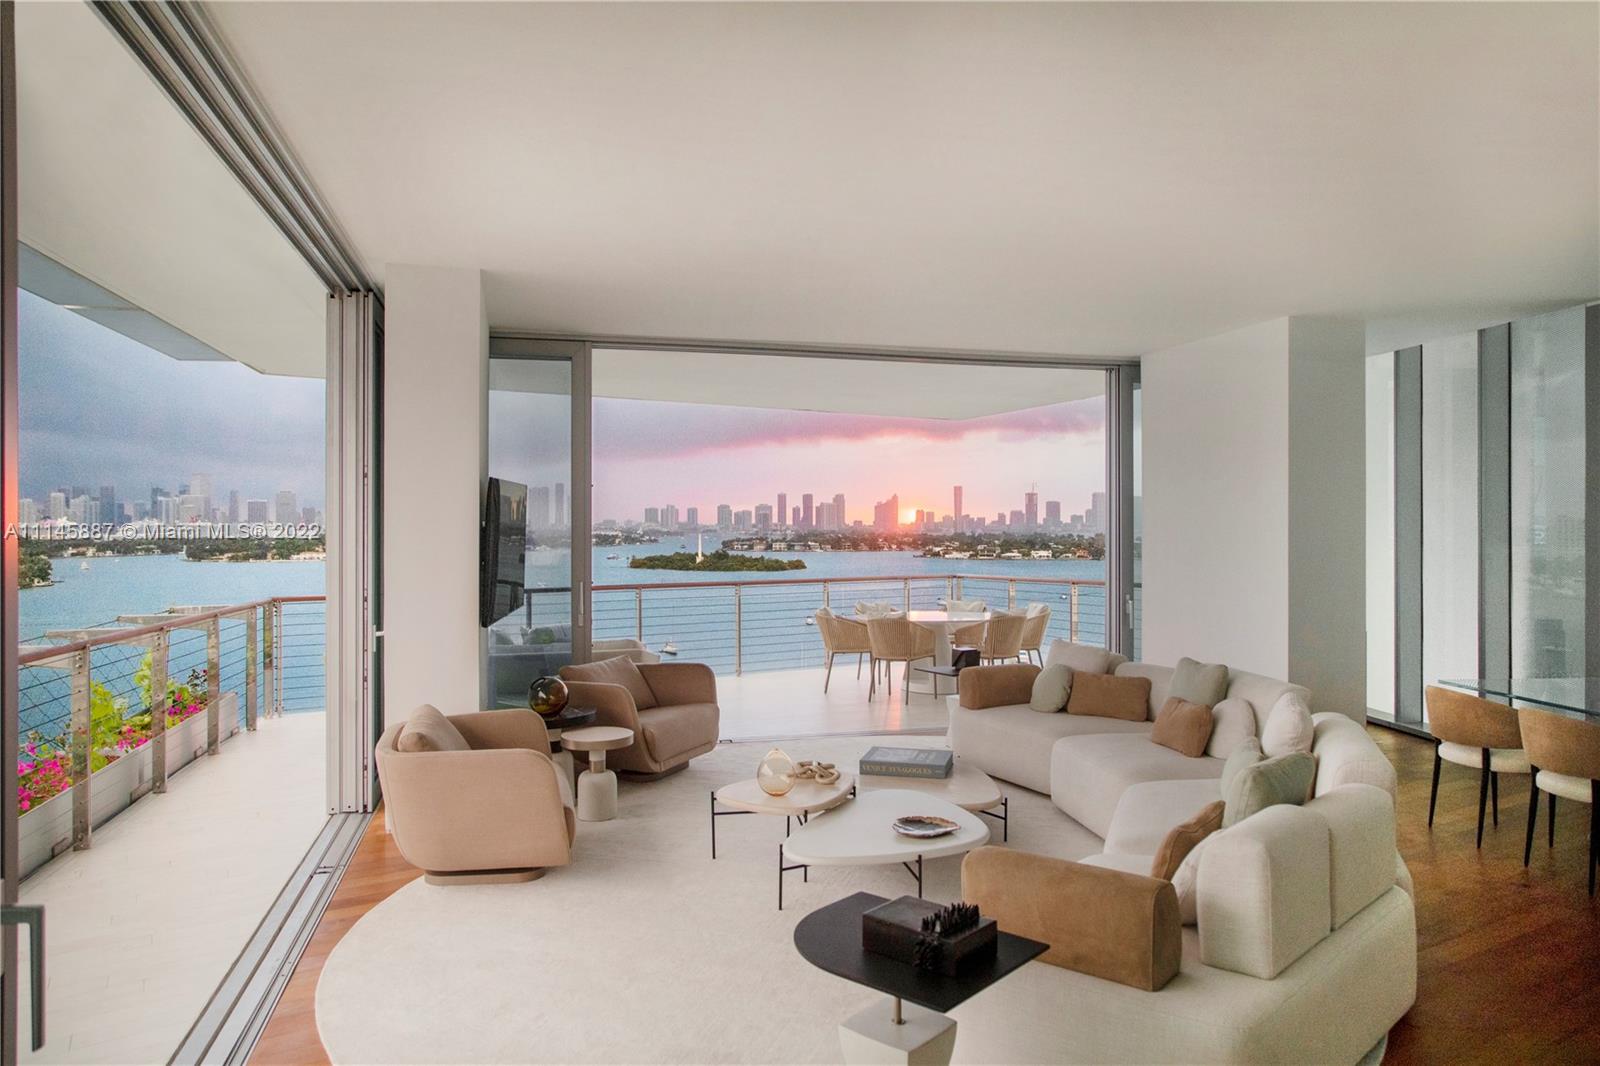 New & Never Occupied, 3/3.5 Residence with 180 views of Biscayne Bay and the Miami Skyline.  Monad Terrace is an exquisitely designed 59-unit condominium by Pritzker Winner, Jean Nouvel, featuring stunning architecture with brilliant light, private outdoor space, climbing gardens, unique sawtooth honeycomb facades & stunning sunset views of Biscayne Bay. Kitchen with dramatic sculptural marble island in Calacatta. Master baths with richly veined, spacious stone countertops, marquetry flooring and tiled walls. Other notable features include custom cabinetry & built-in features, designer fixtures, teak flooring throughout & private elevators. Immediate Occupancy.